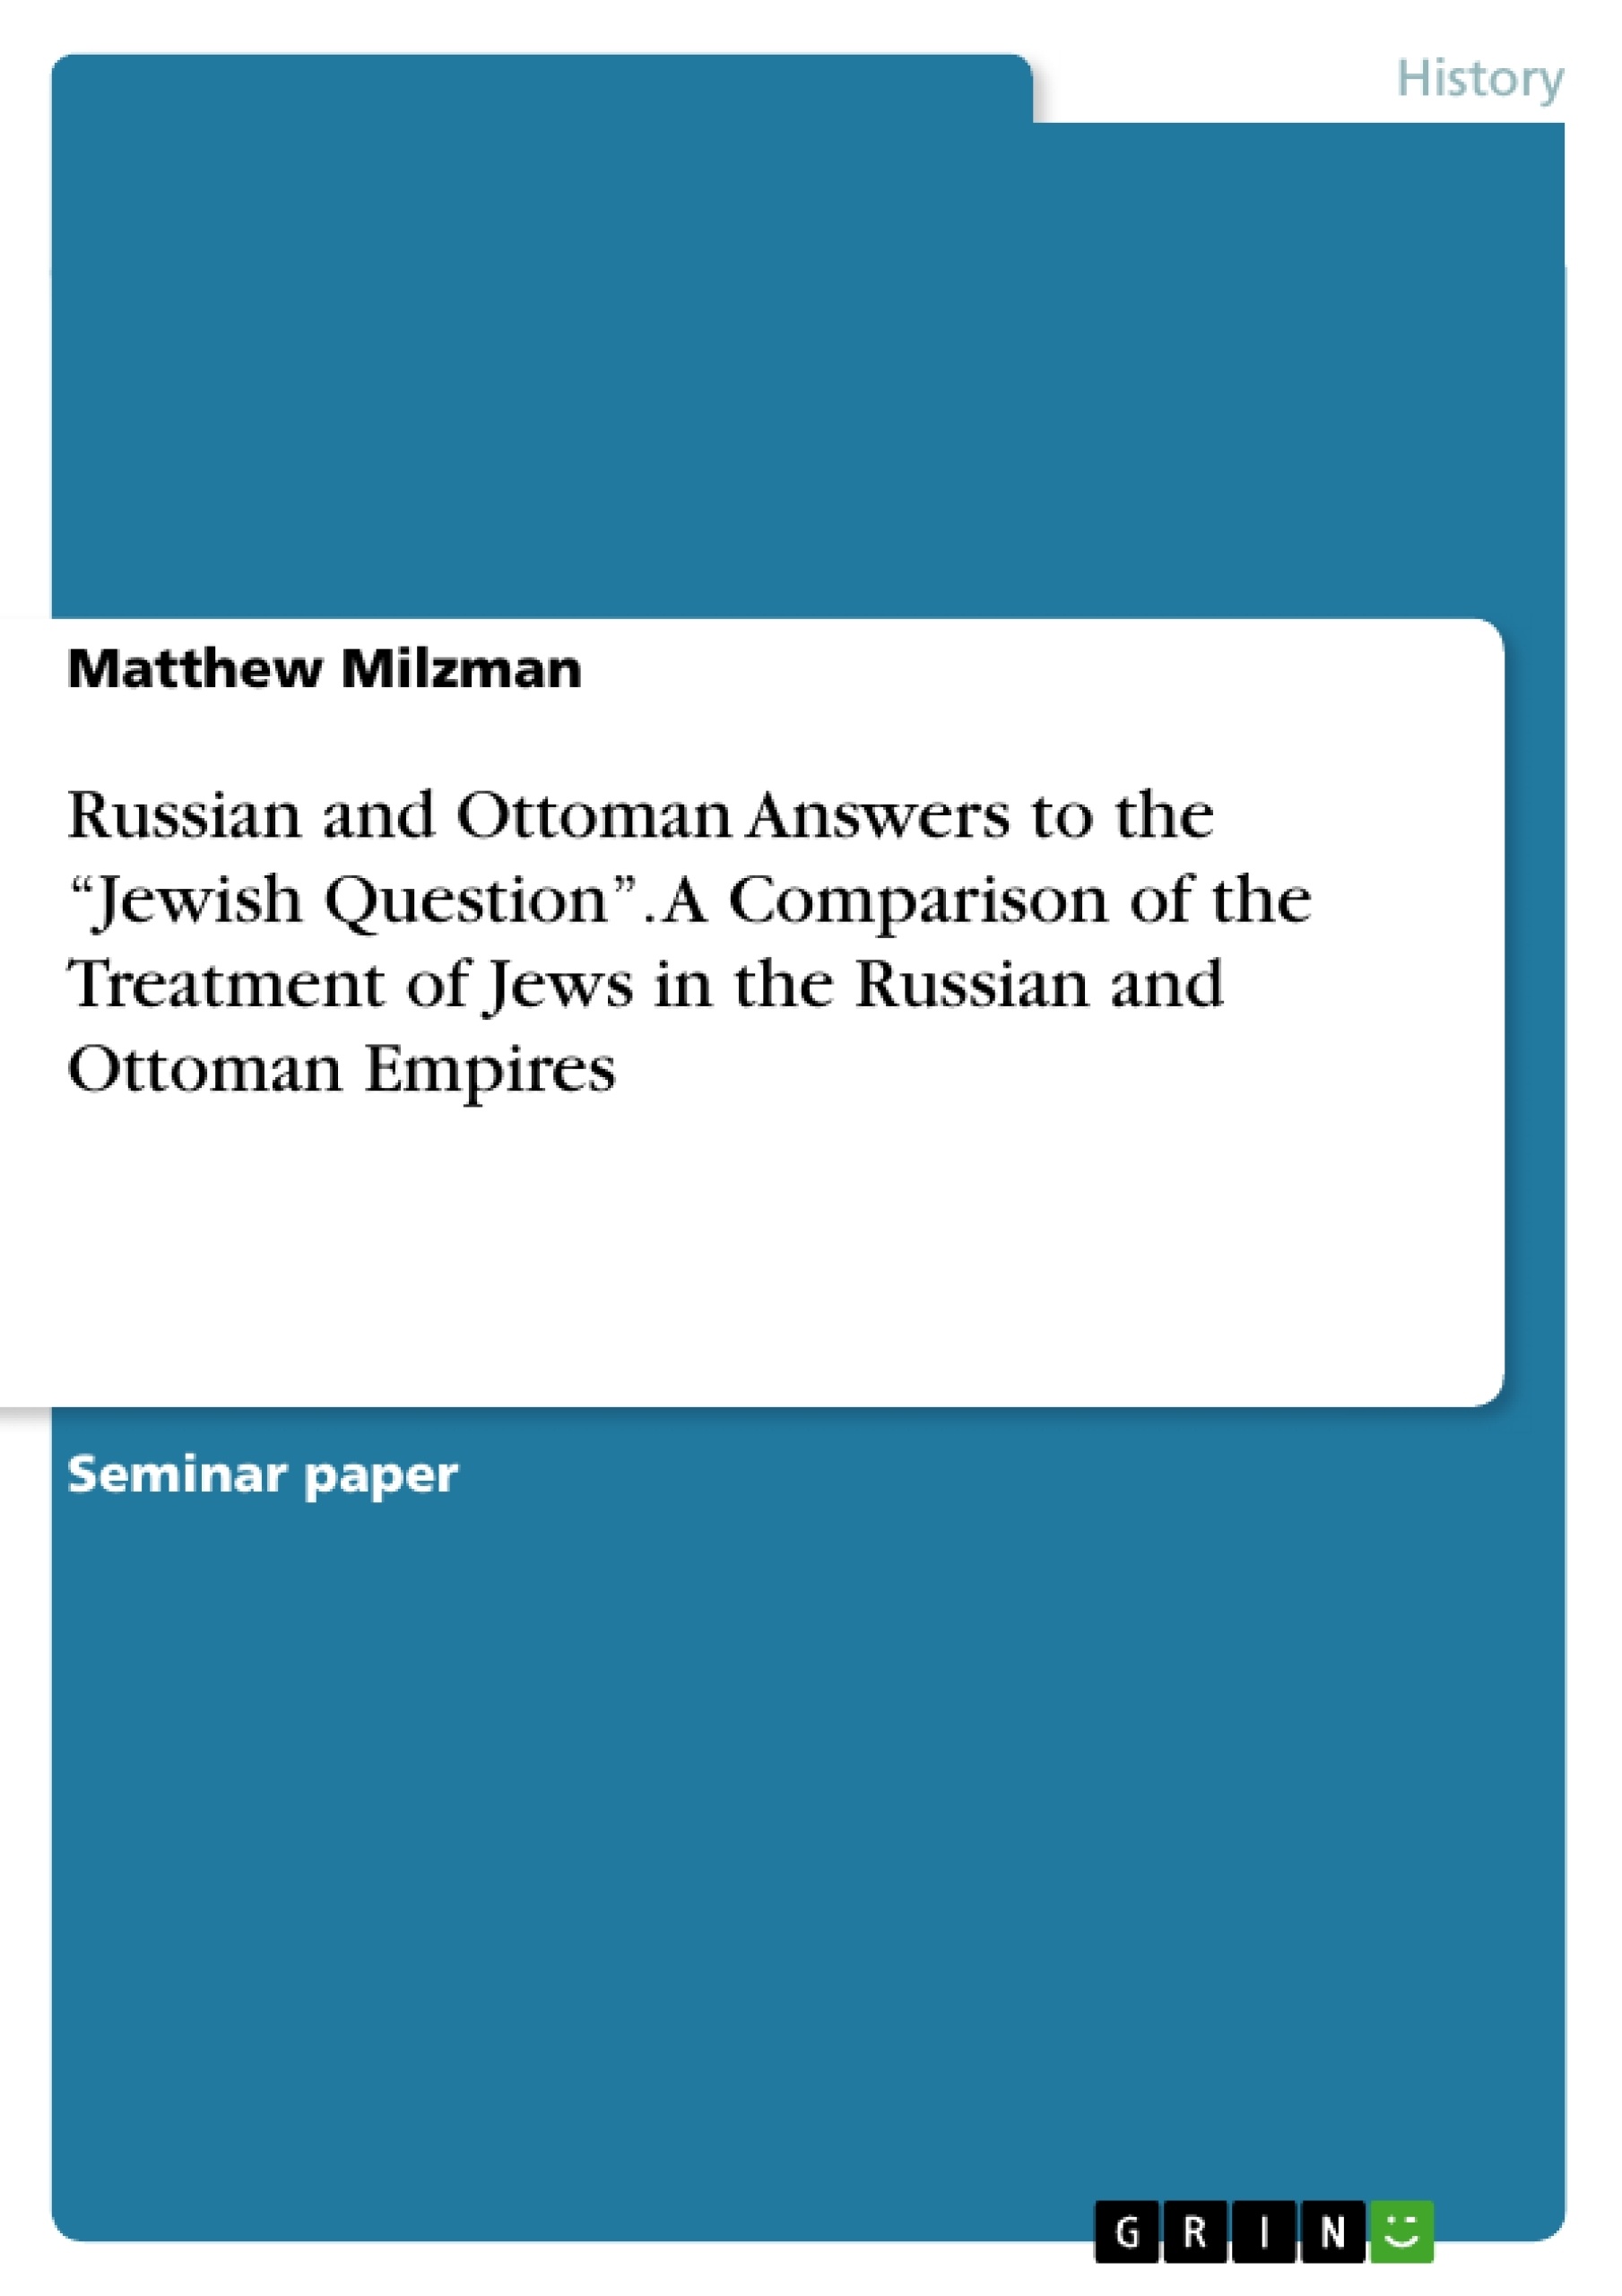 Titre: Russian and Ottoman Answers to the “Jewish Question”. A Comparison of the Treatment of Jews in the Russian and Ottoman Empires